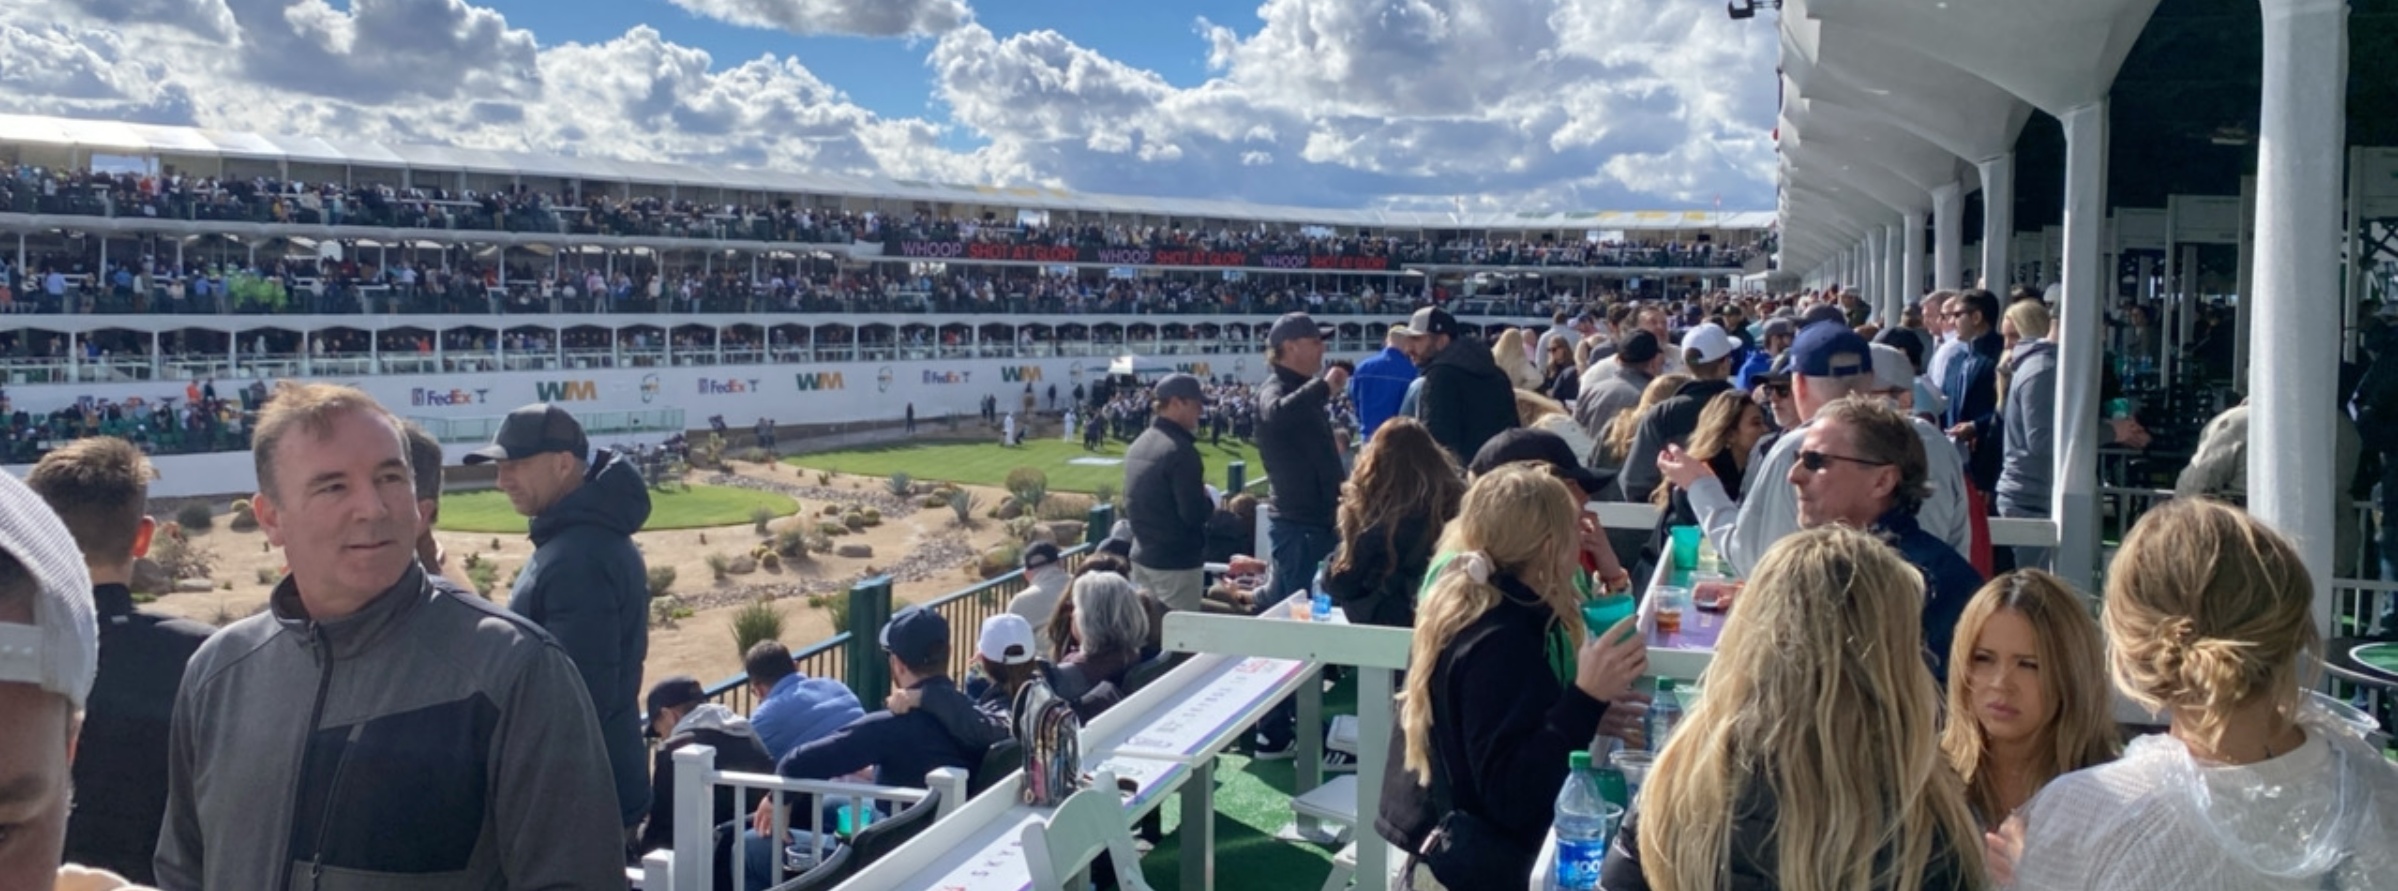 Action in the Skybox 16 on hole 16 at the Waste Management Open